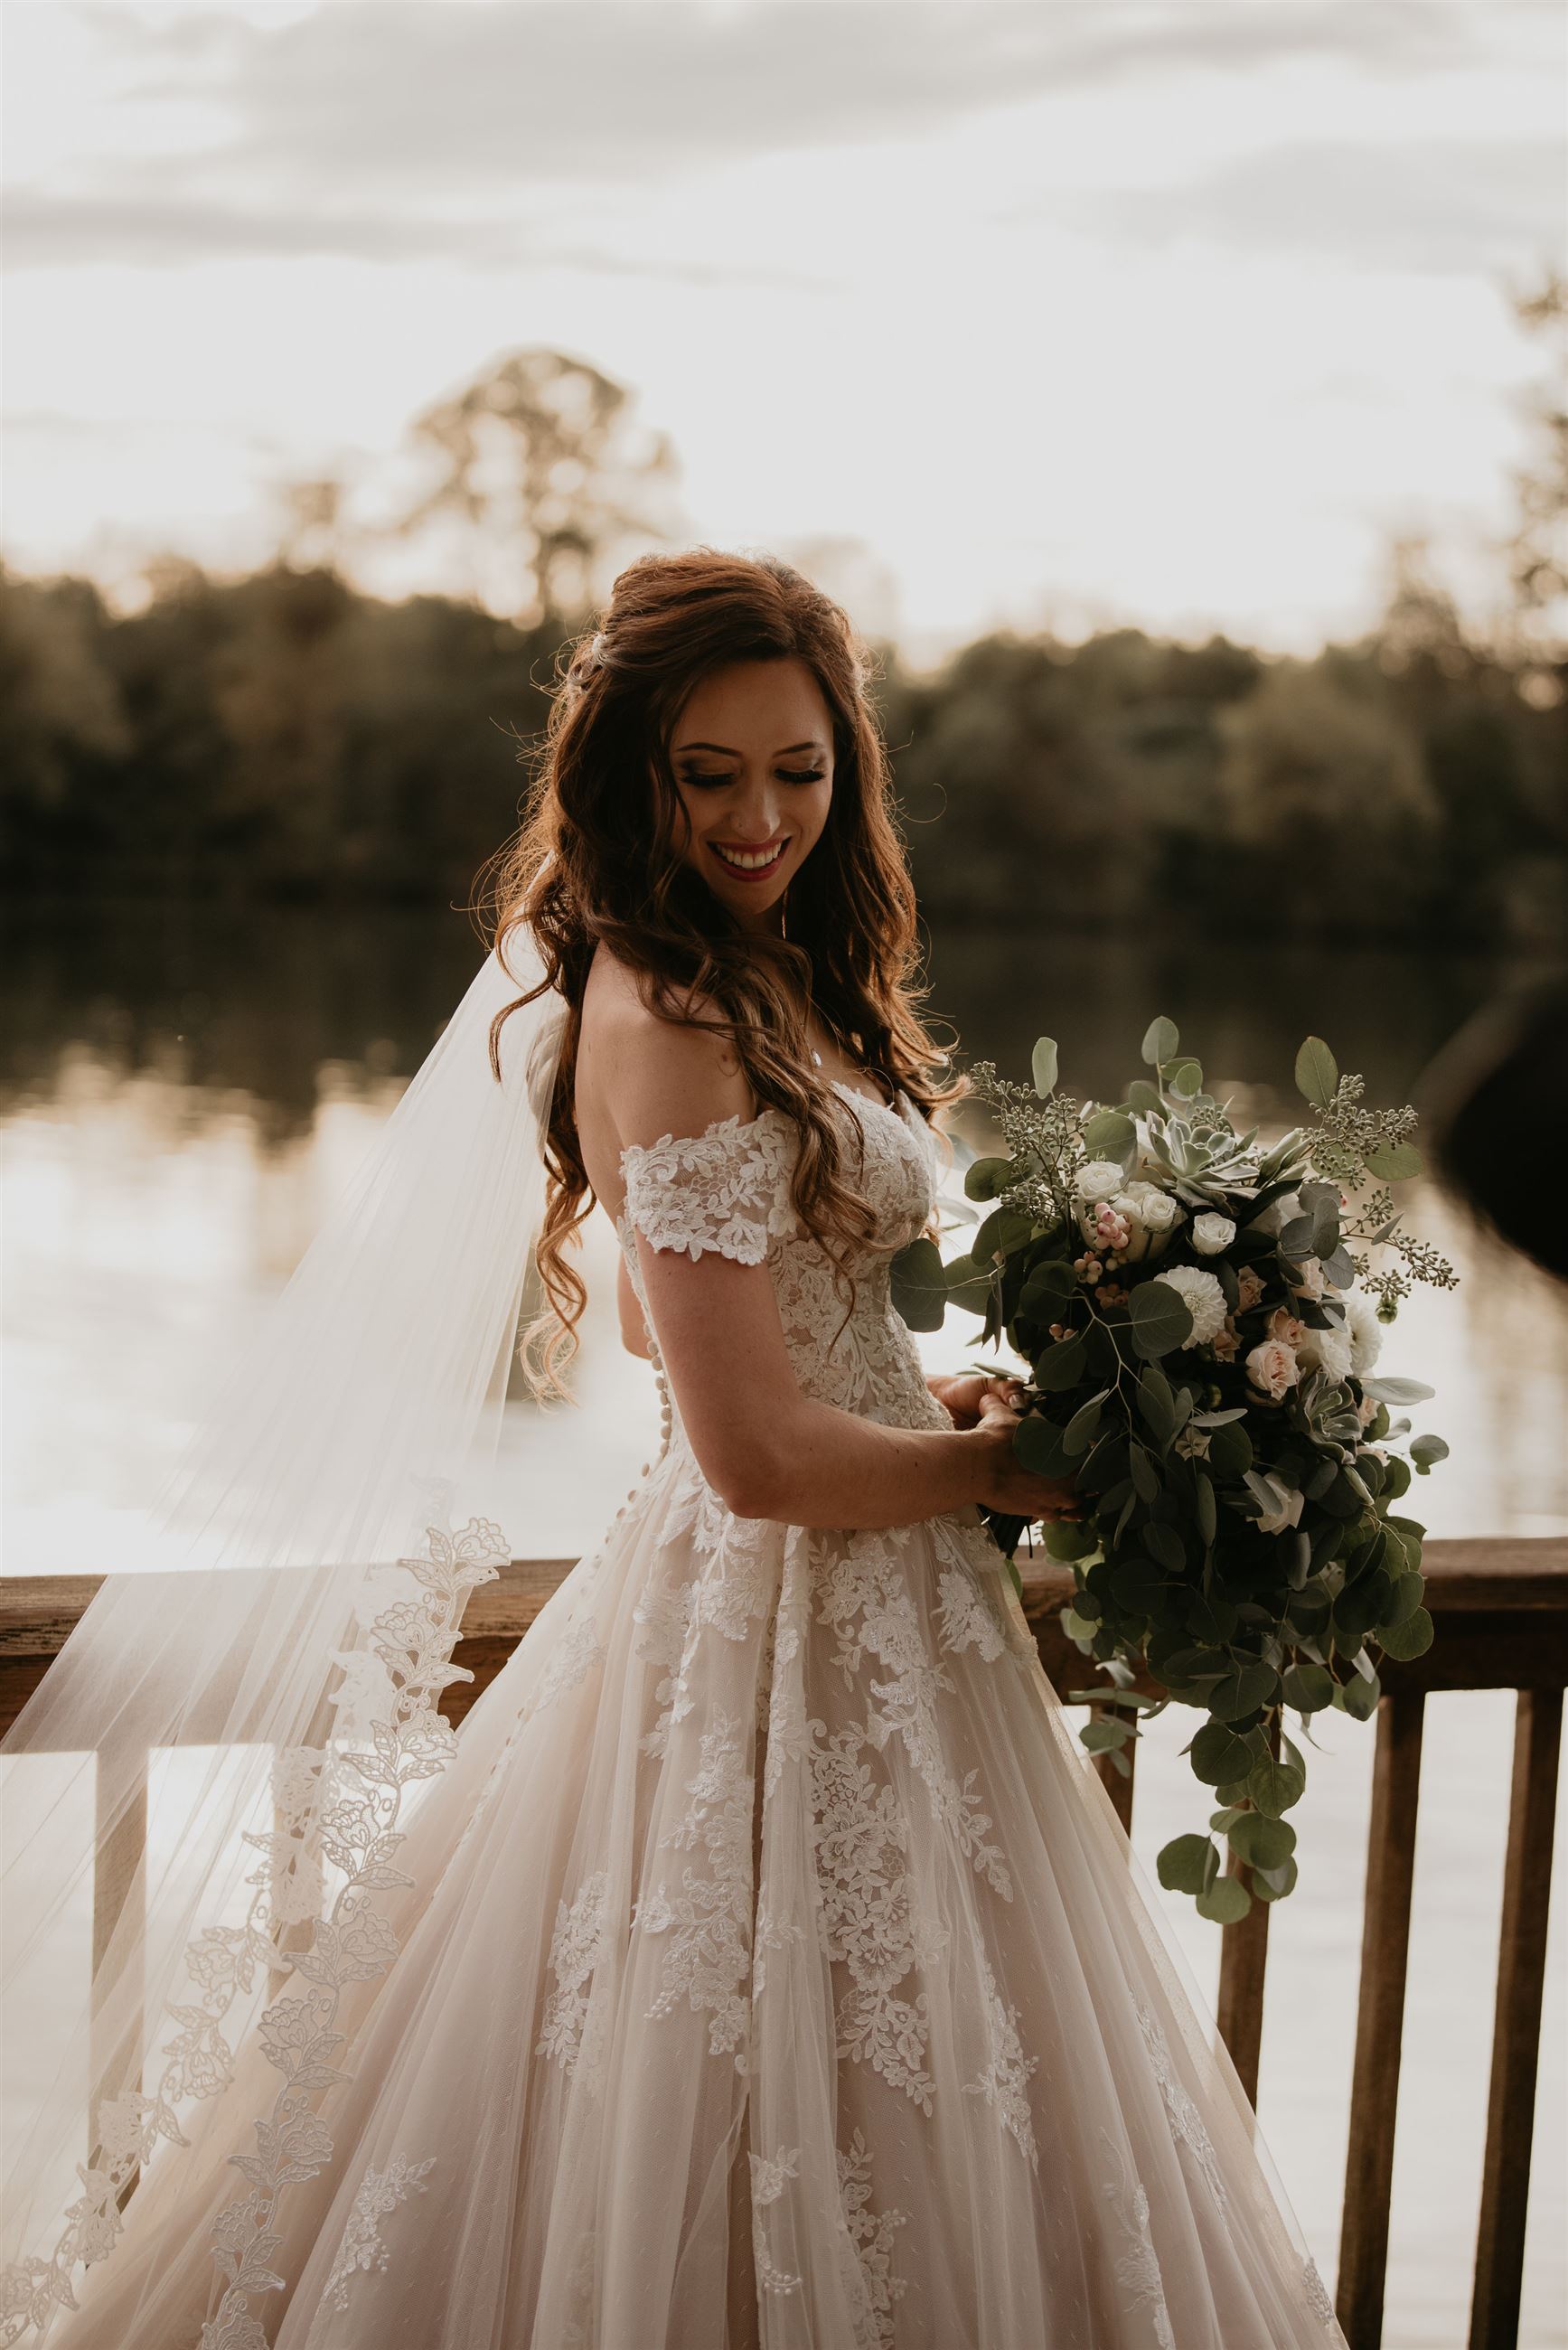 Bride in Justin Alexander "88122" ball gown from Charlotte's Weddings in Portland, OR